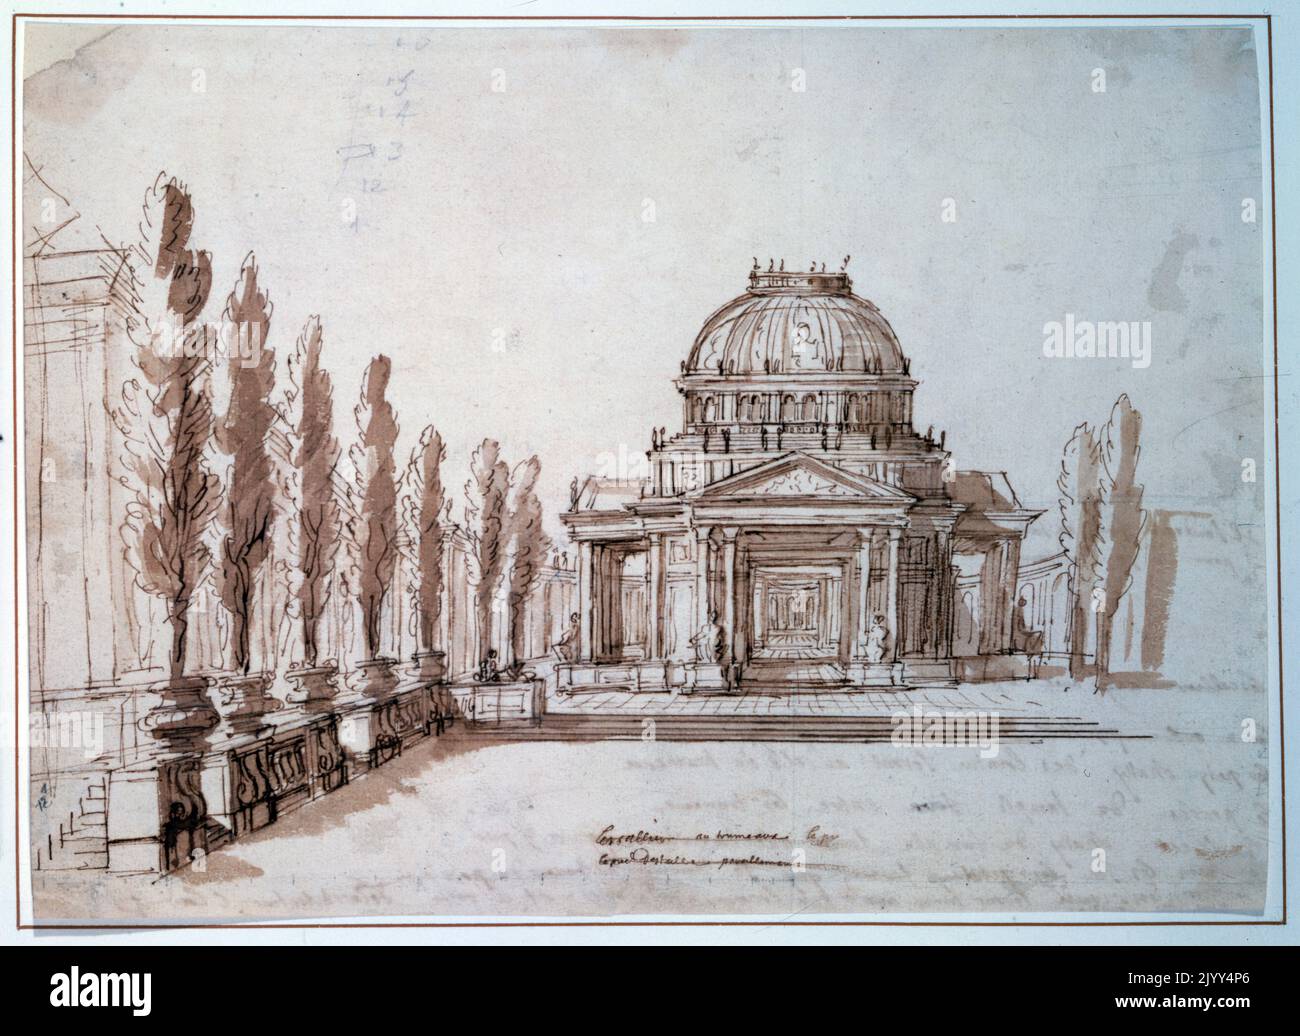 set design for Achille et Polyxene, designed by Berain for 'Achille et Polyxene' an opera with music by Jean-Baptiste Lully, first performed in 1687. Jean-Baptiste Lully (1632 - March 1687) was an Italian-born French composer, instrumentalist, and dancer who spent most of his life working in the court of Louis XIV of France. Jean Berain the Elder (1640 - 1711) was a draughtsman and designer. Thesee (Theseus) is a tragedie en musique, an early type of French opera, in a prologue and five acts with music by Jean-Baptiste Lully. Achille et Polyxene (Achilles and Polyxena) is a tragedie lyrique co Stock Photo